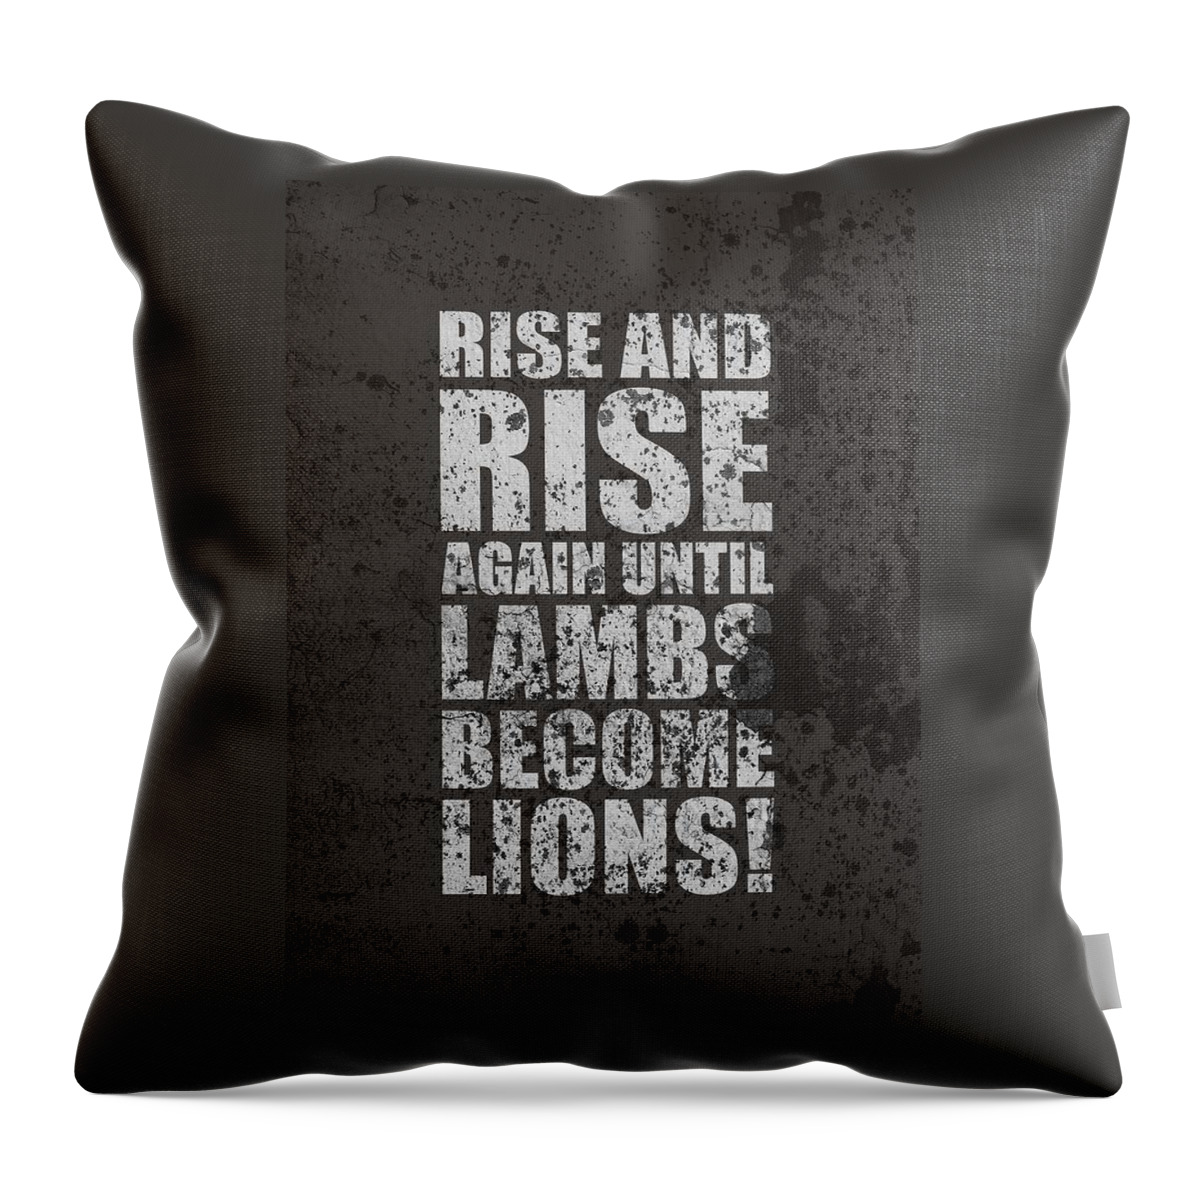 Rise And Rise Again Until Lambs Become Lions Throw Pillow featuring the digital art Life Motivating Quotes Poster by Lab No 4 - The Quotography Department